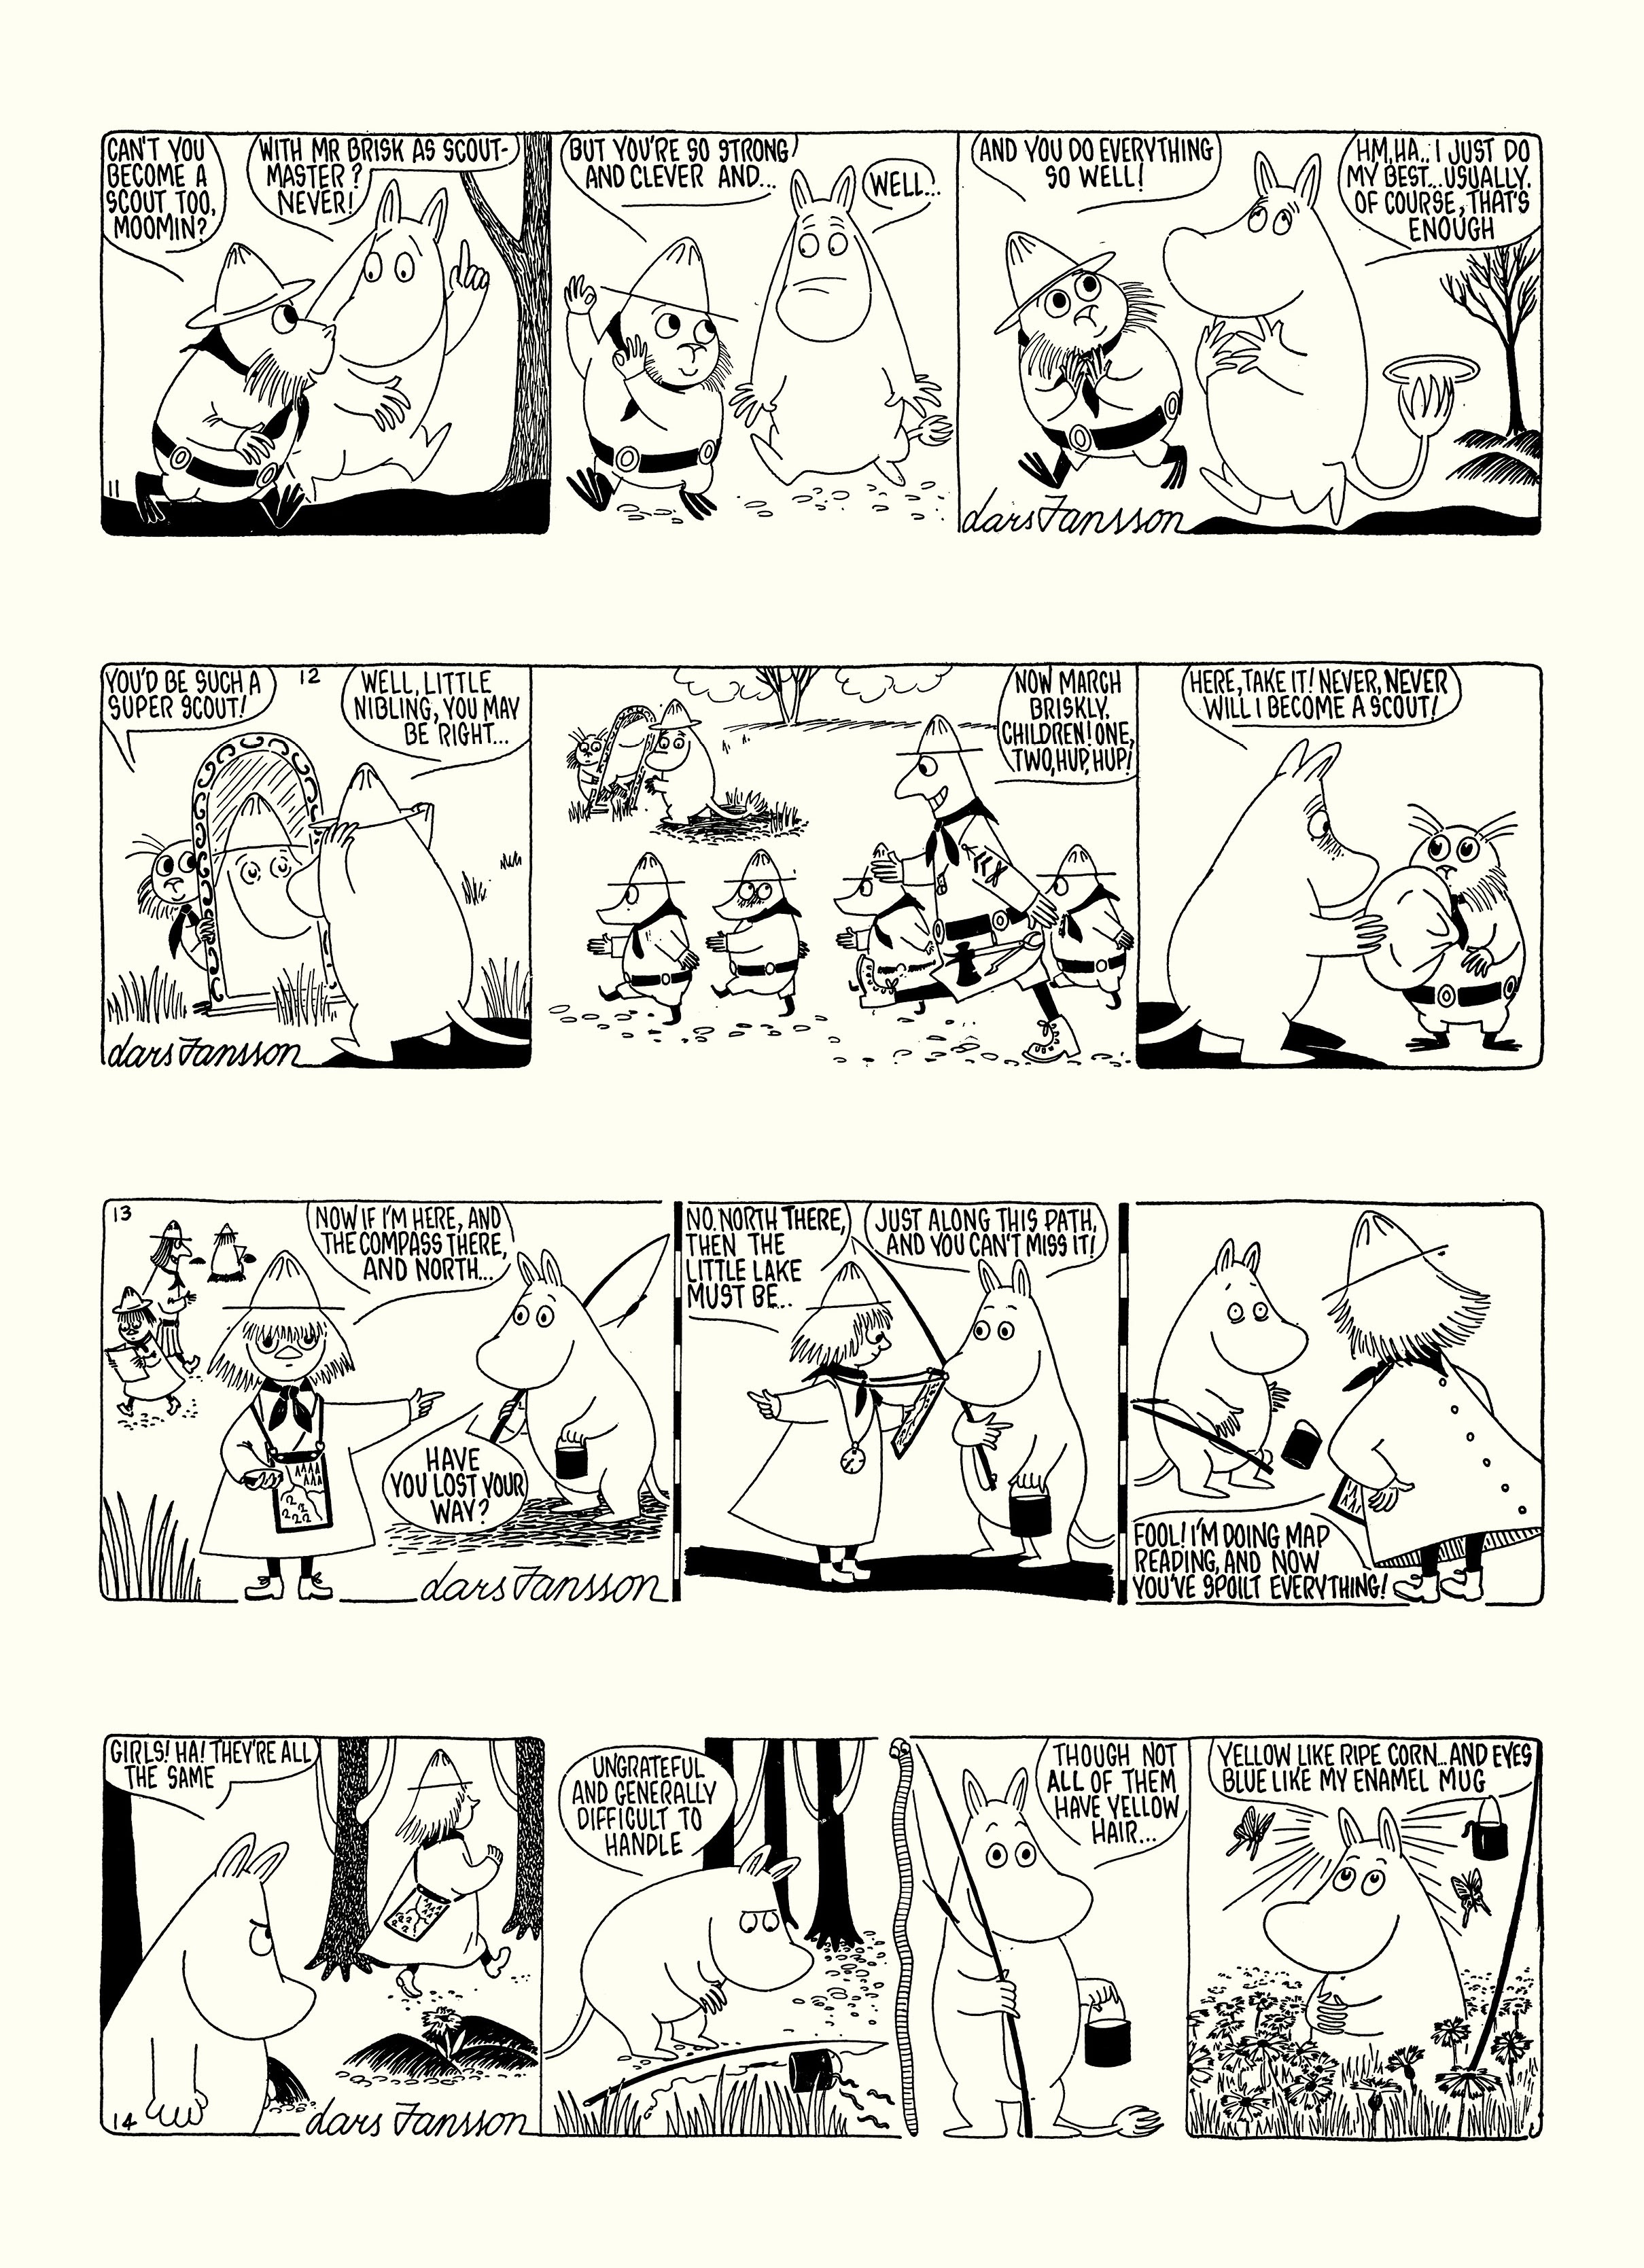 Read online Moomin: The Complete Lars Jansson Comic Strip comic -  Issue # TPB 7 - 30